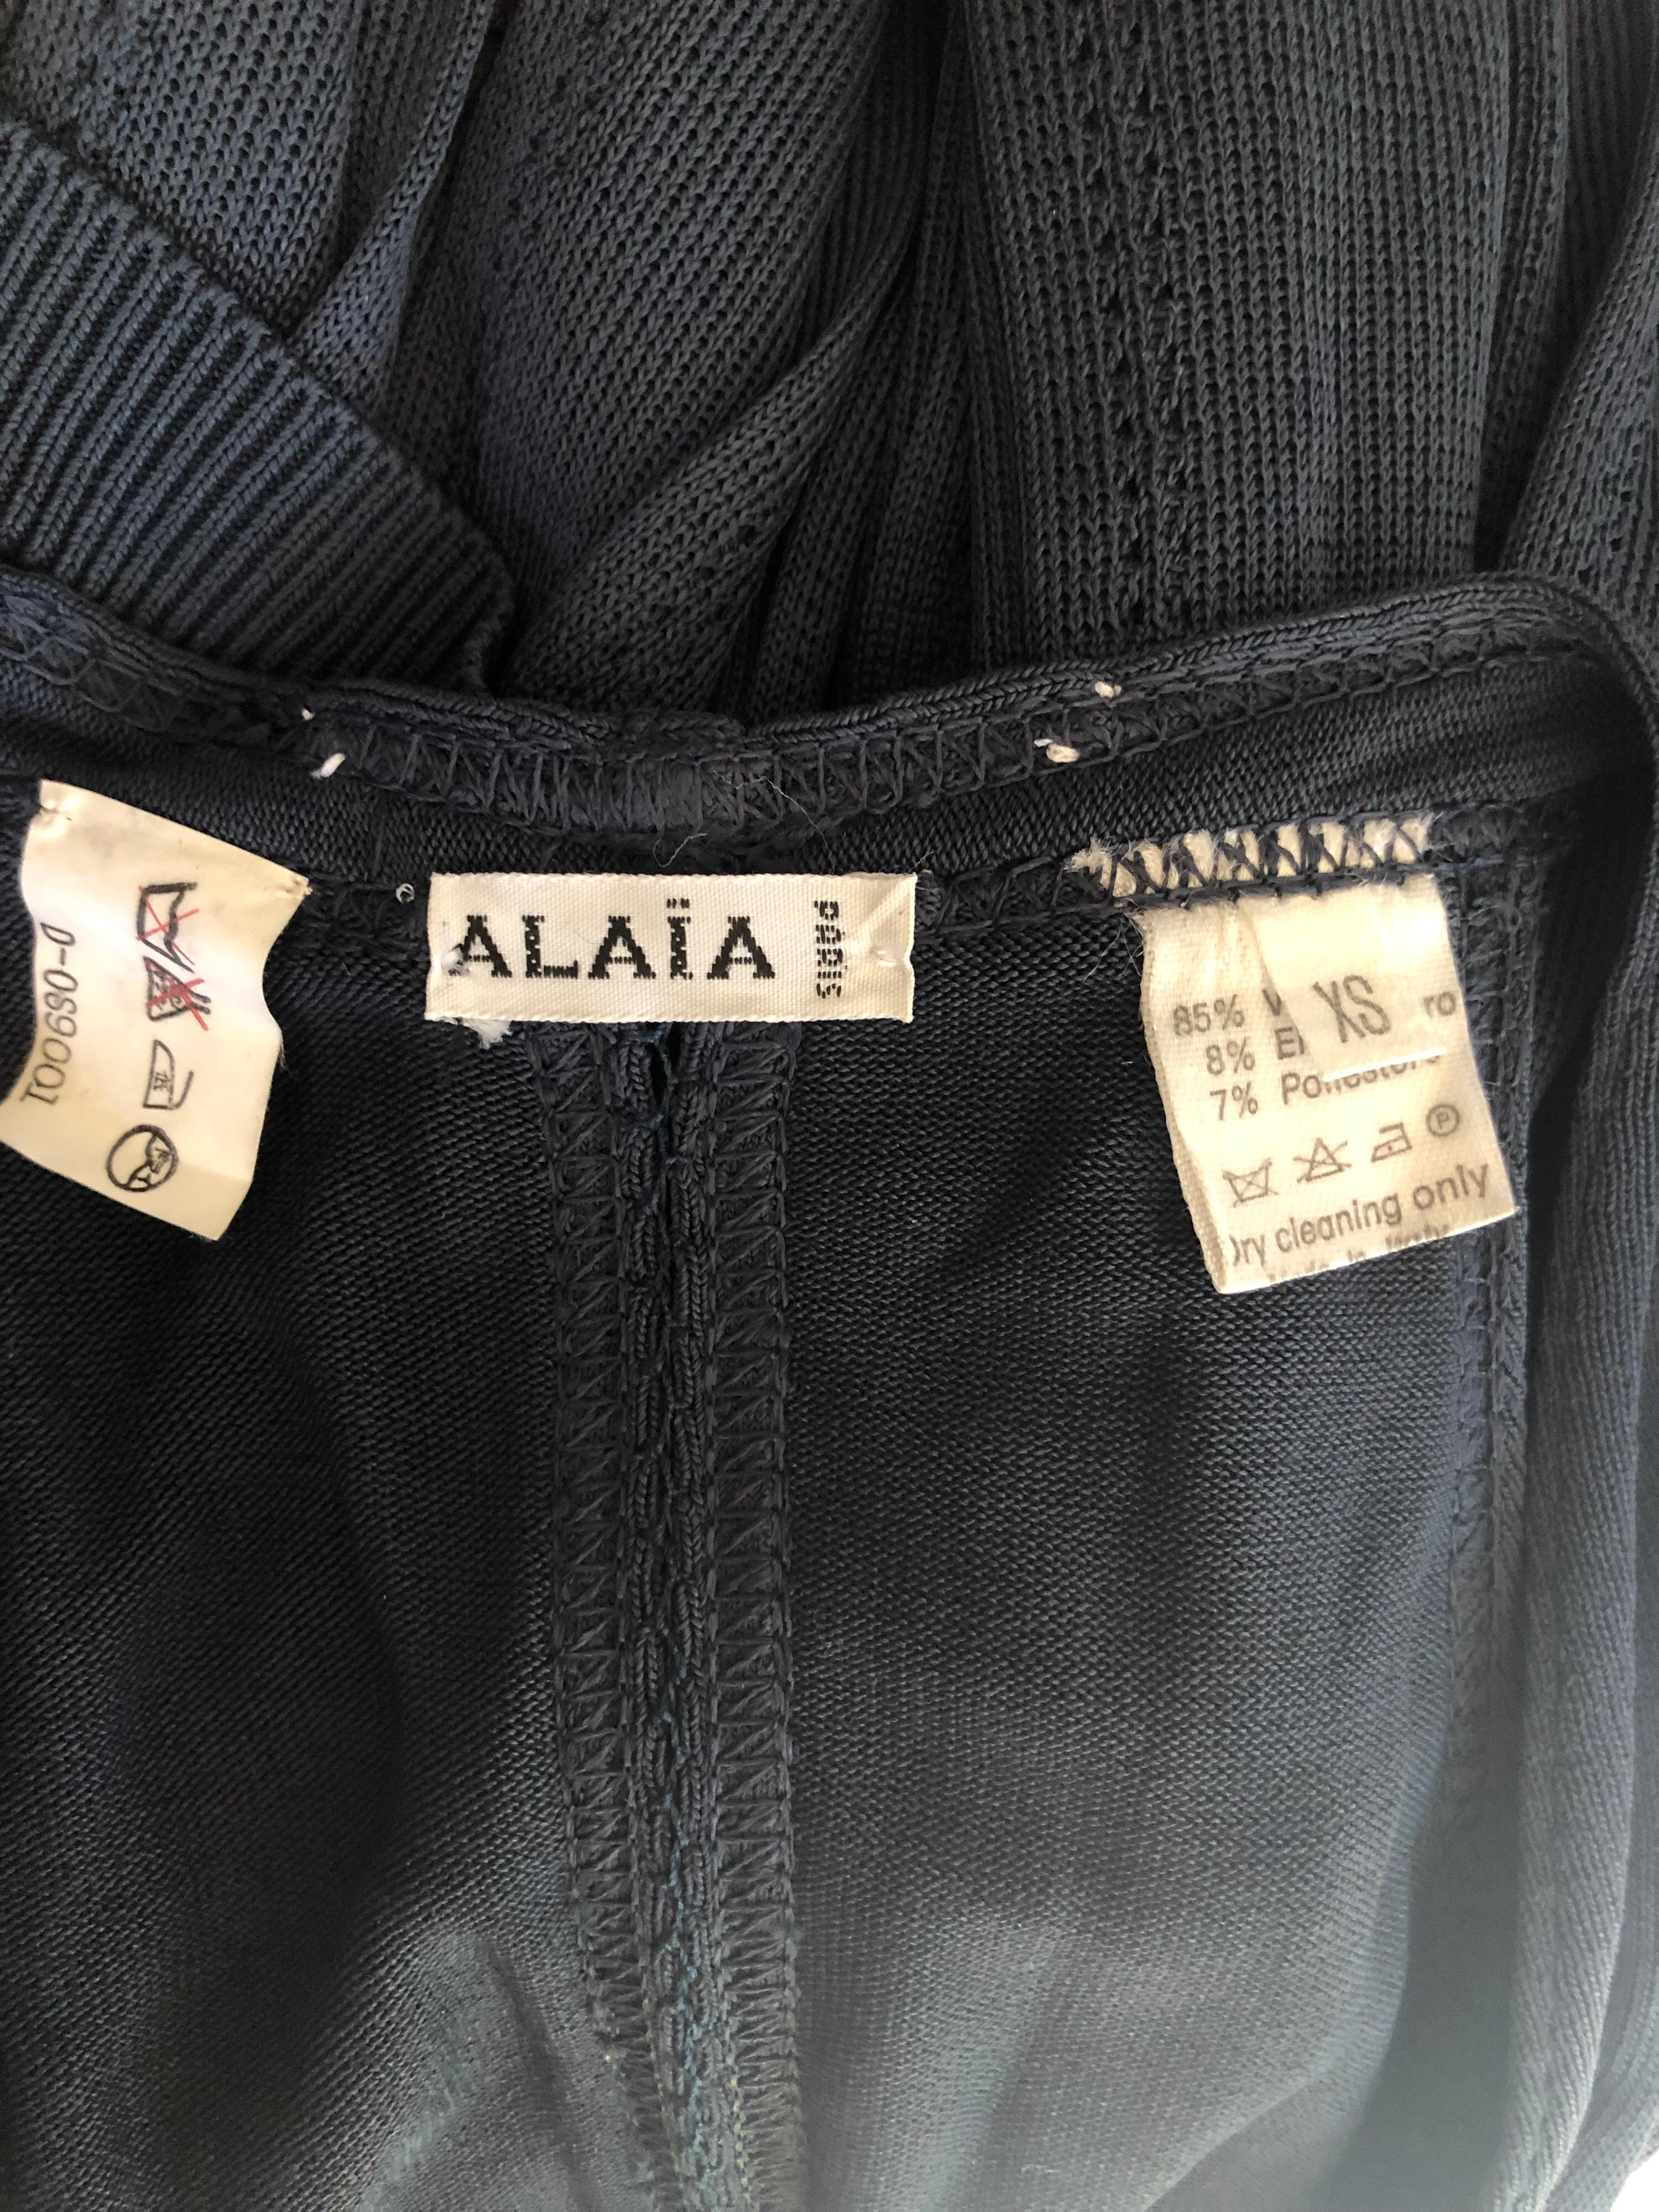 Azzedine Alaia S/S 1988 Vintage Plunging Semi-Sheer Midi Dress In Excellent Condition For Sale In Naples, FL